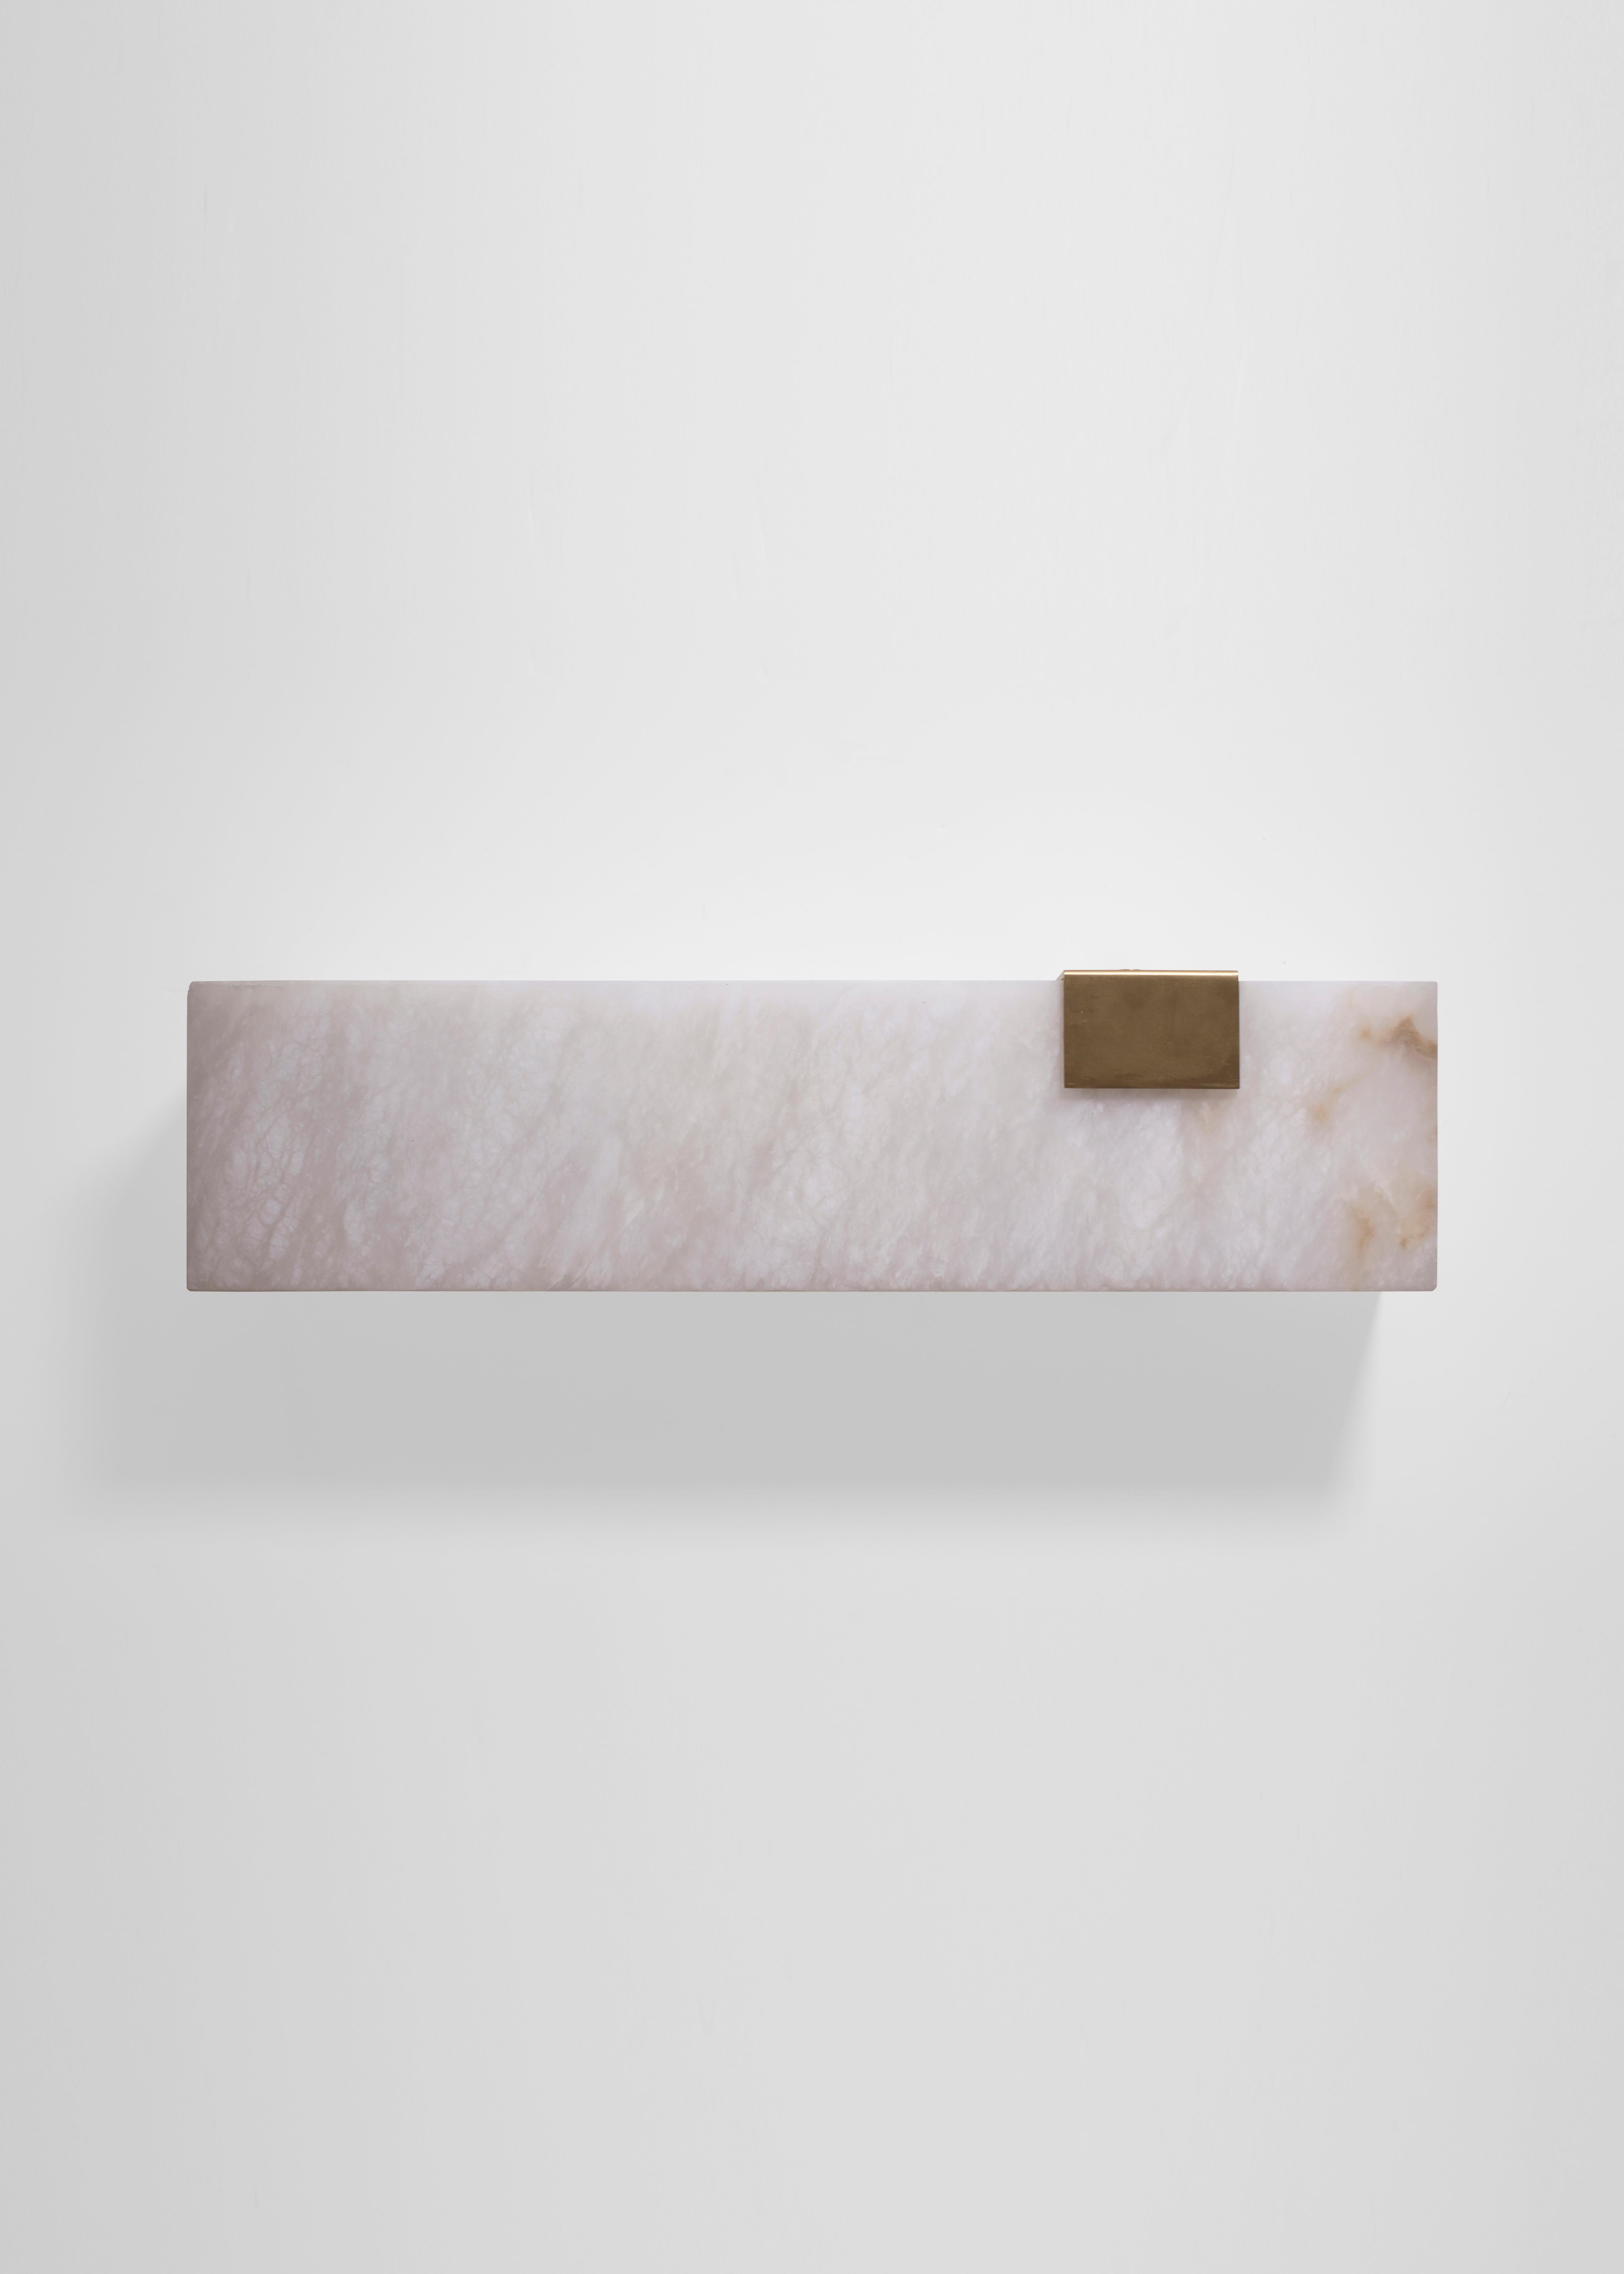 Orphan Work 003-1C Sconce, 2018
Shown in brushed brass and alabaster 
Available in brushed brass, brushed nickel and blackened brass
Measures: 5 1/4”H x 19”W x 3 7/8”D
Wall or ceiling mount
Vertical or horizontal
Plug-in by request
1-4 adjustable